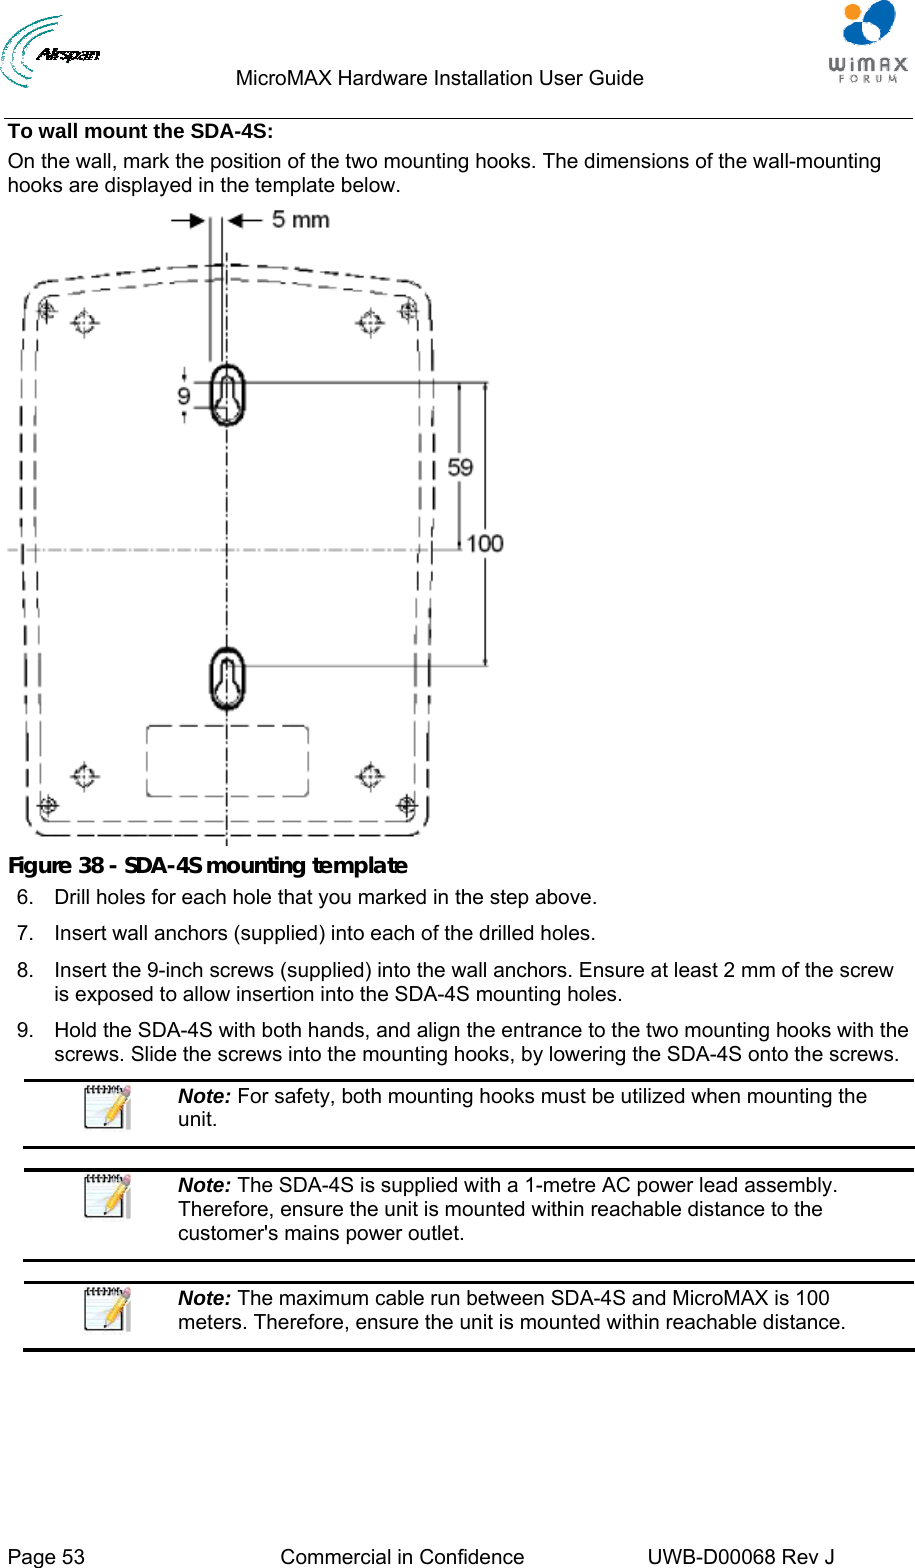                                  MicroMAX Hardware Installation User Guide     Page 53  Commercial in Confidence  UWB-D00068 Rev J   To wall mount the SDA-4S: On the wall, mark the position of the two mounting hooks. The dimensions of the wall-mounting hooks are displayed in the template below.  Figure 38 - SDA-4S mounting template 6.  Drill holes for each hole that you marked in the step above. 7.  Insert wall anchors (supplied) into each of the drilled holes. 8.  Insert the 9-inch screws (supplied) into the wall anchors. Ensure at least 2 mm of the screw is exposed to allow insertion into the SDA-4S mounting holes. 9.  Hold the SDA-4S with both hands, and align the entrance to the two mounting hooks with the screws. Slide the screws into the mounting hooks, by lowering the SDA-4S onto the screws.  Note: For safety, both mounting hooks must be utilized when mounting the unit.   Note: The SDA-4S is supplied with a 1-metre AC power lead assembly. Therefore, ensure the unit is mounted within reachable distance to the customer&apos;s mains power outlet.   Note: The maximum cable run between SDA-4S and MicroMAX is 100 meters. Therefore, ensure the unit is mounted within reachable distance.  